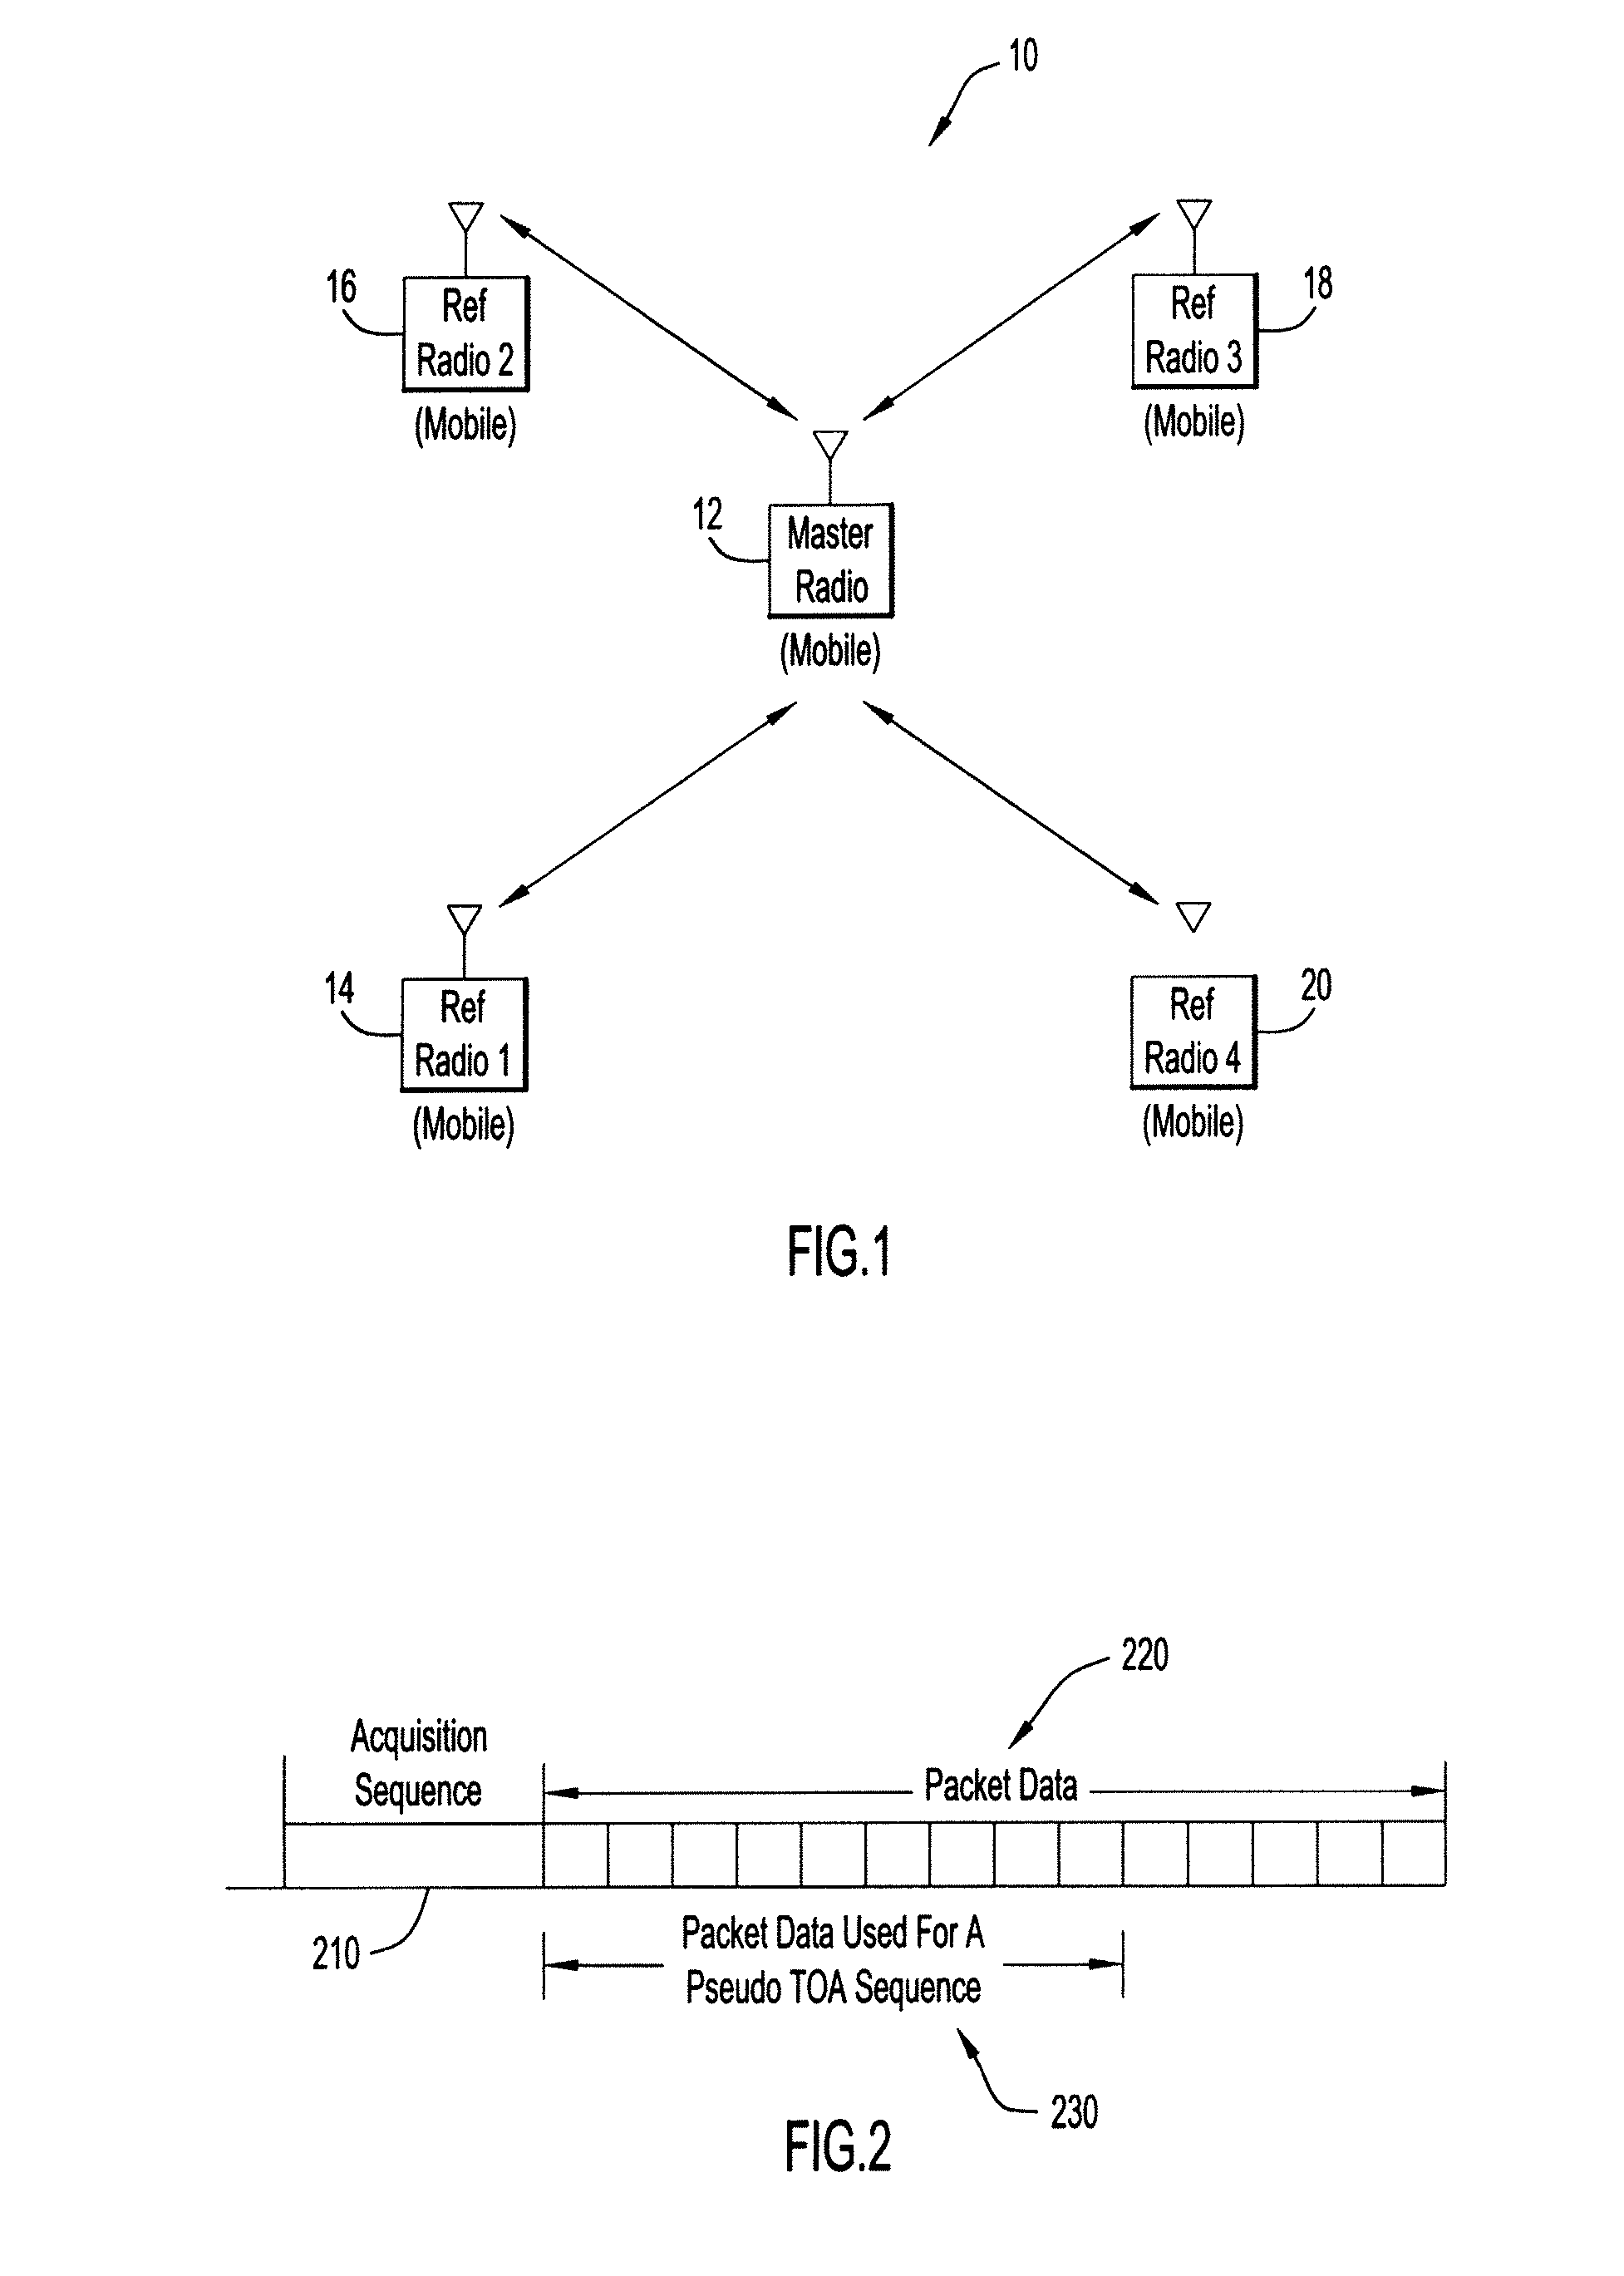 Ranging Between Radios Using Pseudo Time of Arrival Sequence